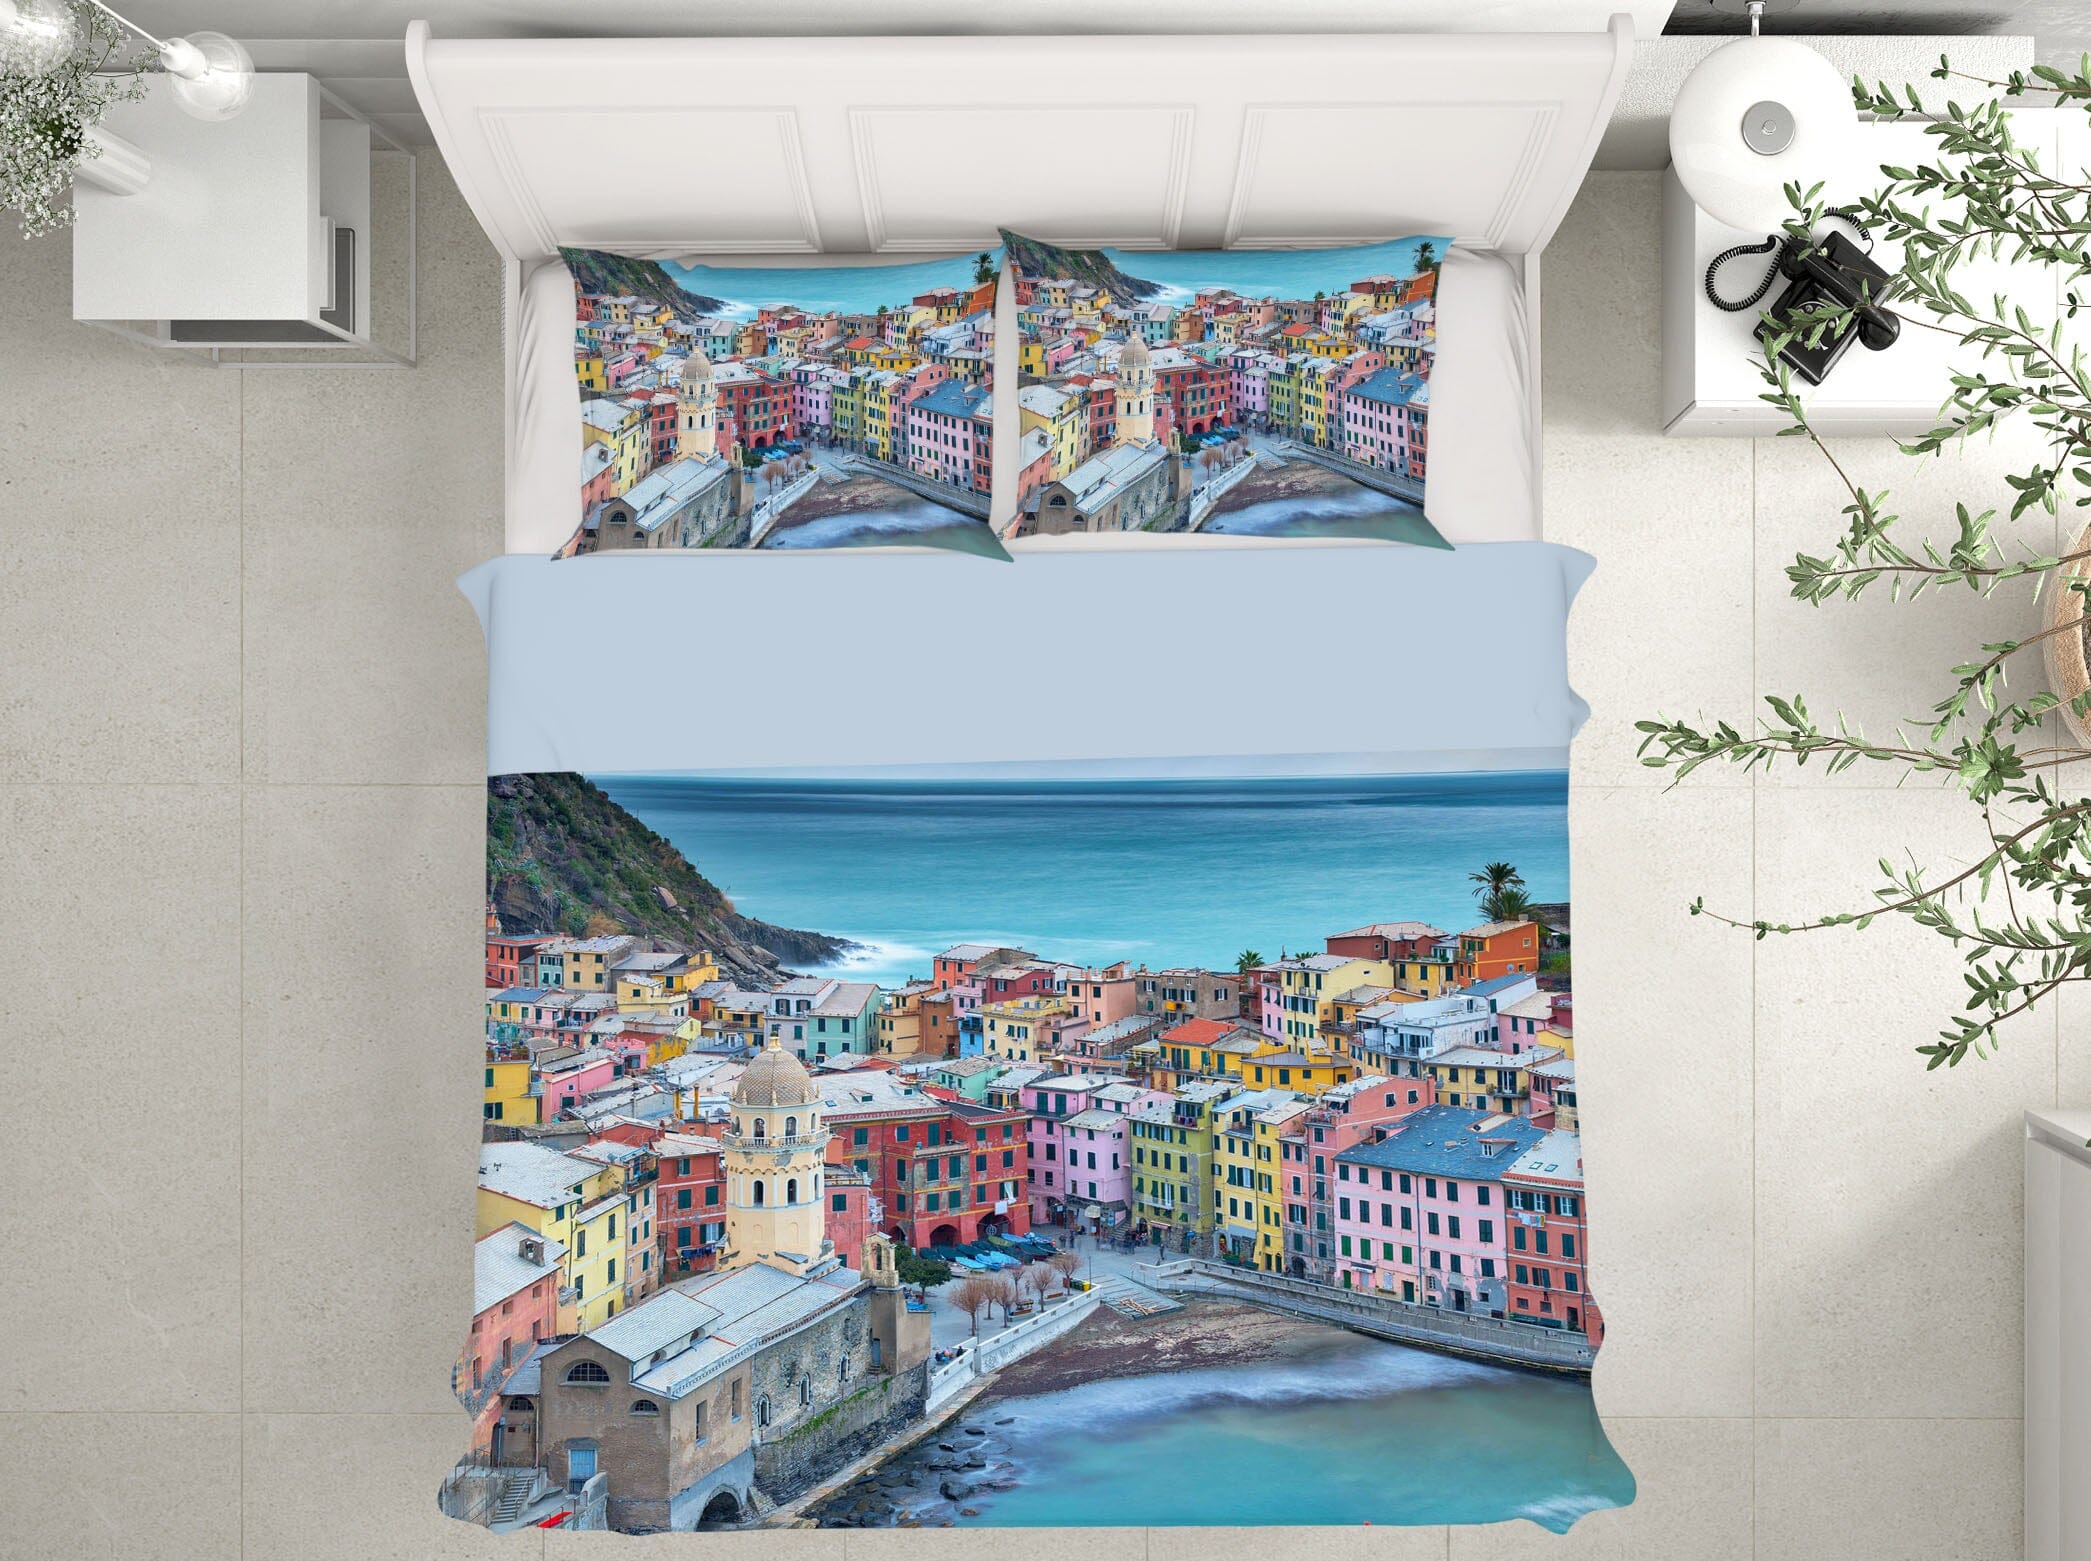 3D Seaside City 2126 Marco Carmassi Bedding Bed Pillowcases Quilt Quiet Covers AJ Creativity Home 